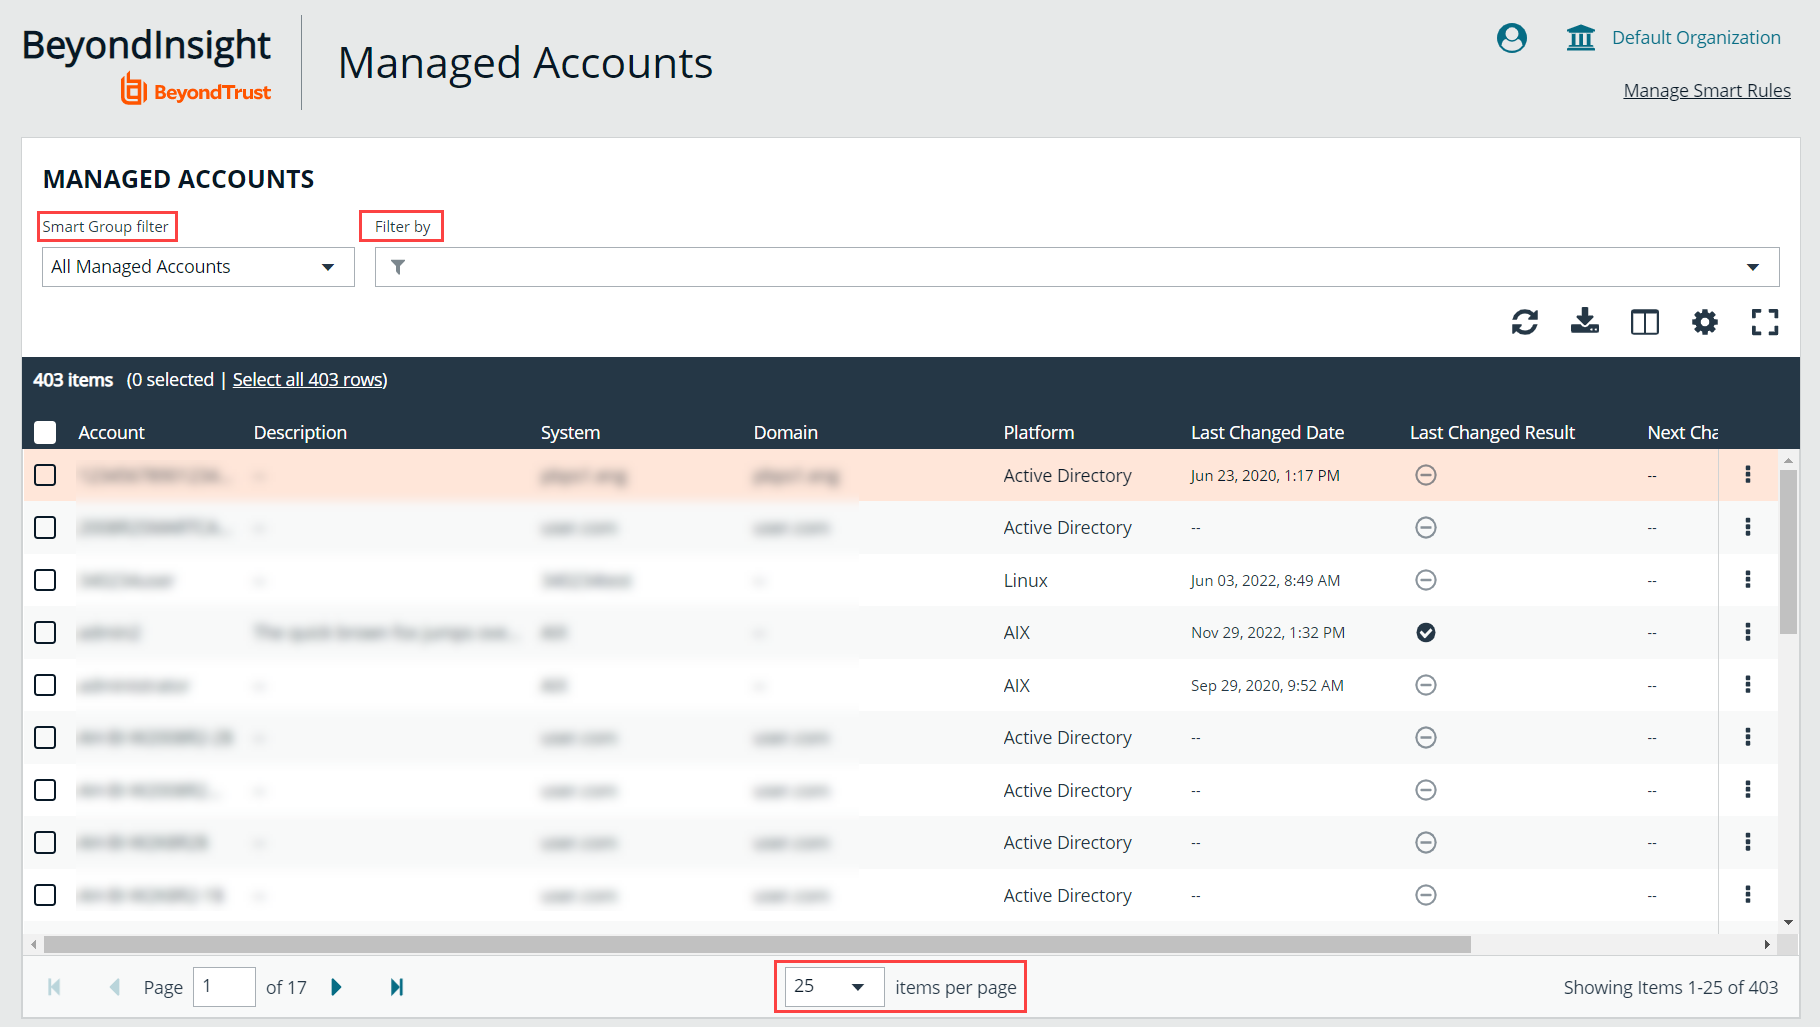 Managed Accounts page highlighting the available filters for the grid.